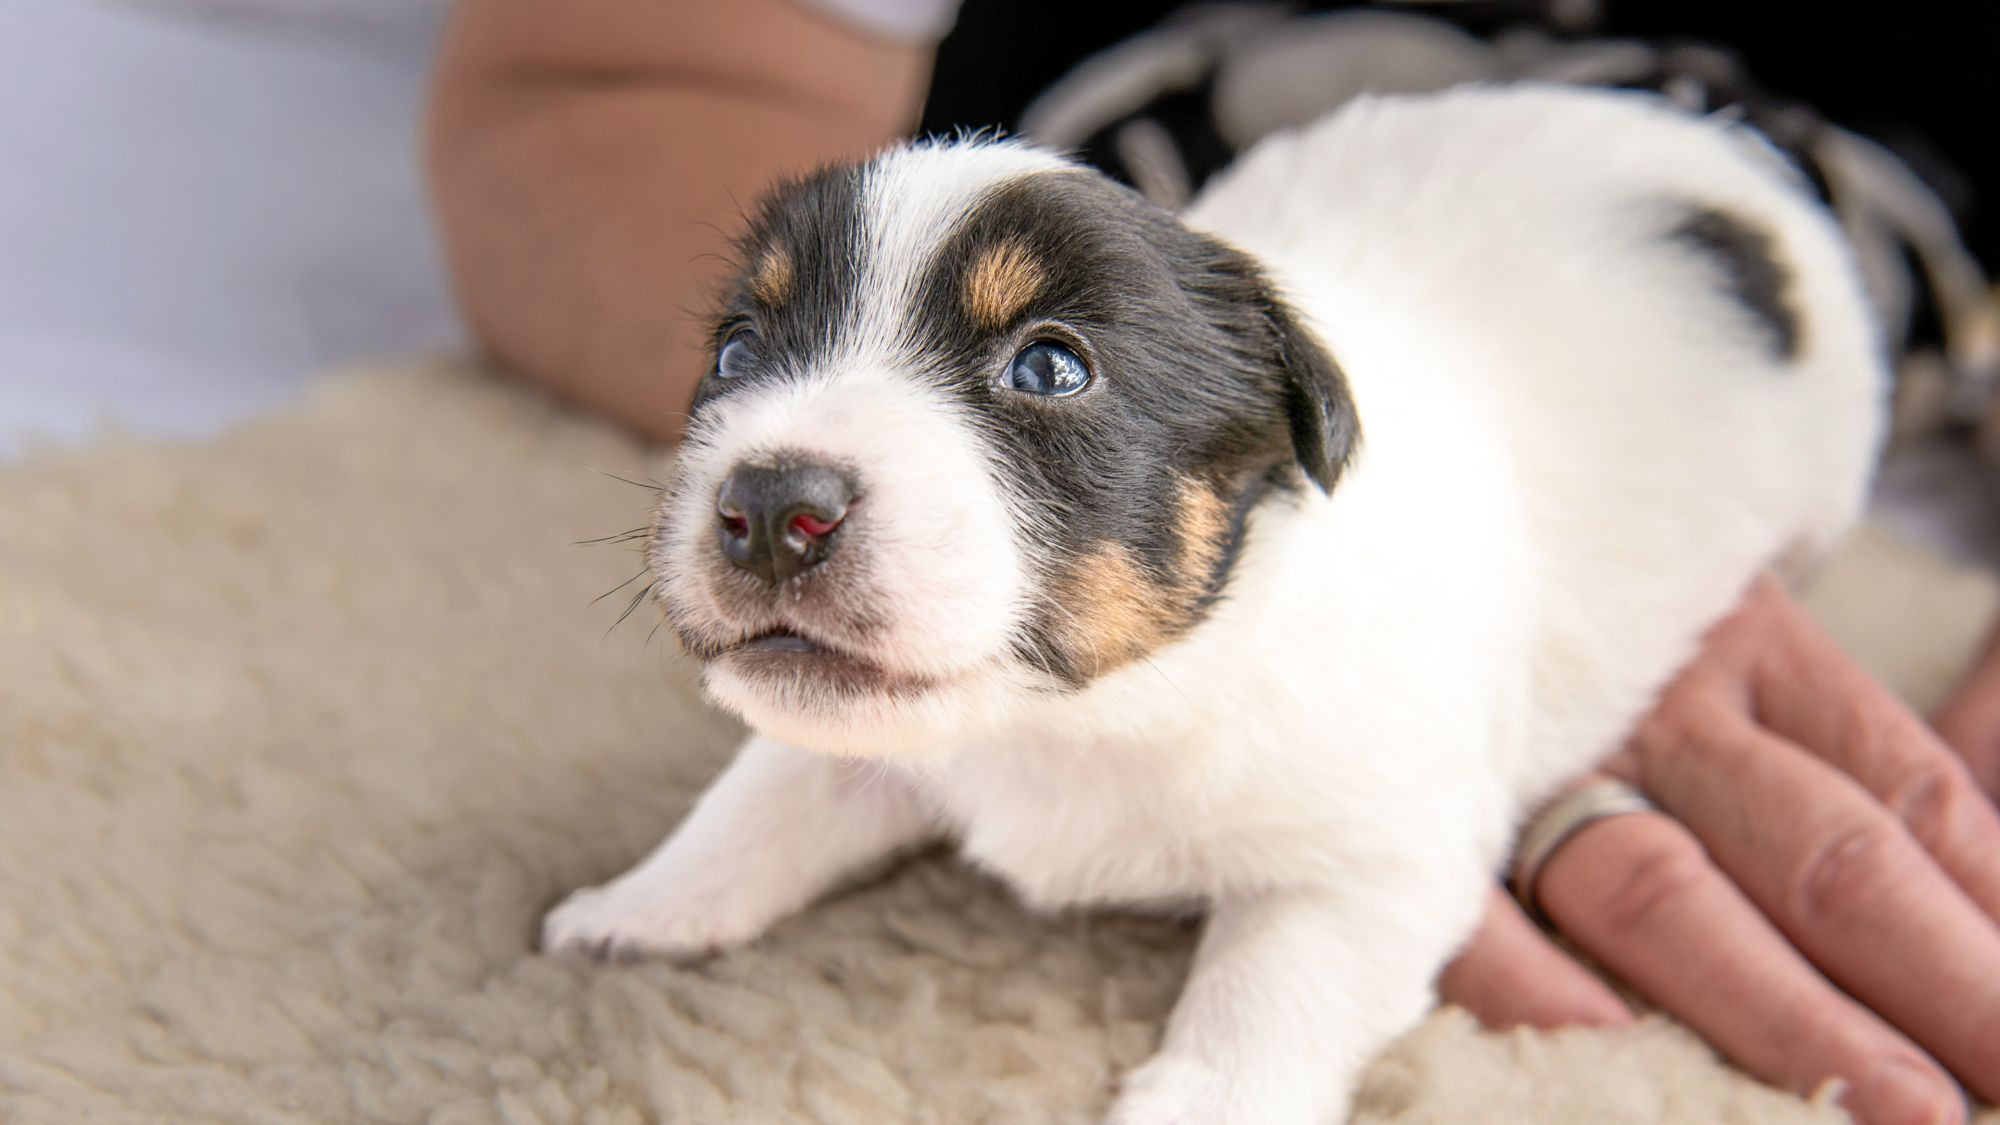 Young Jack Russell Terrier puppy playing on a cream rug